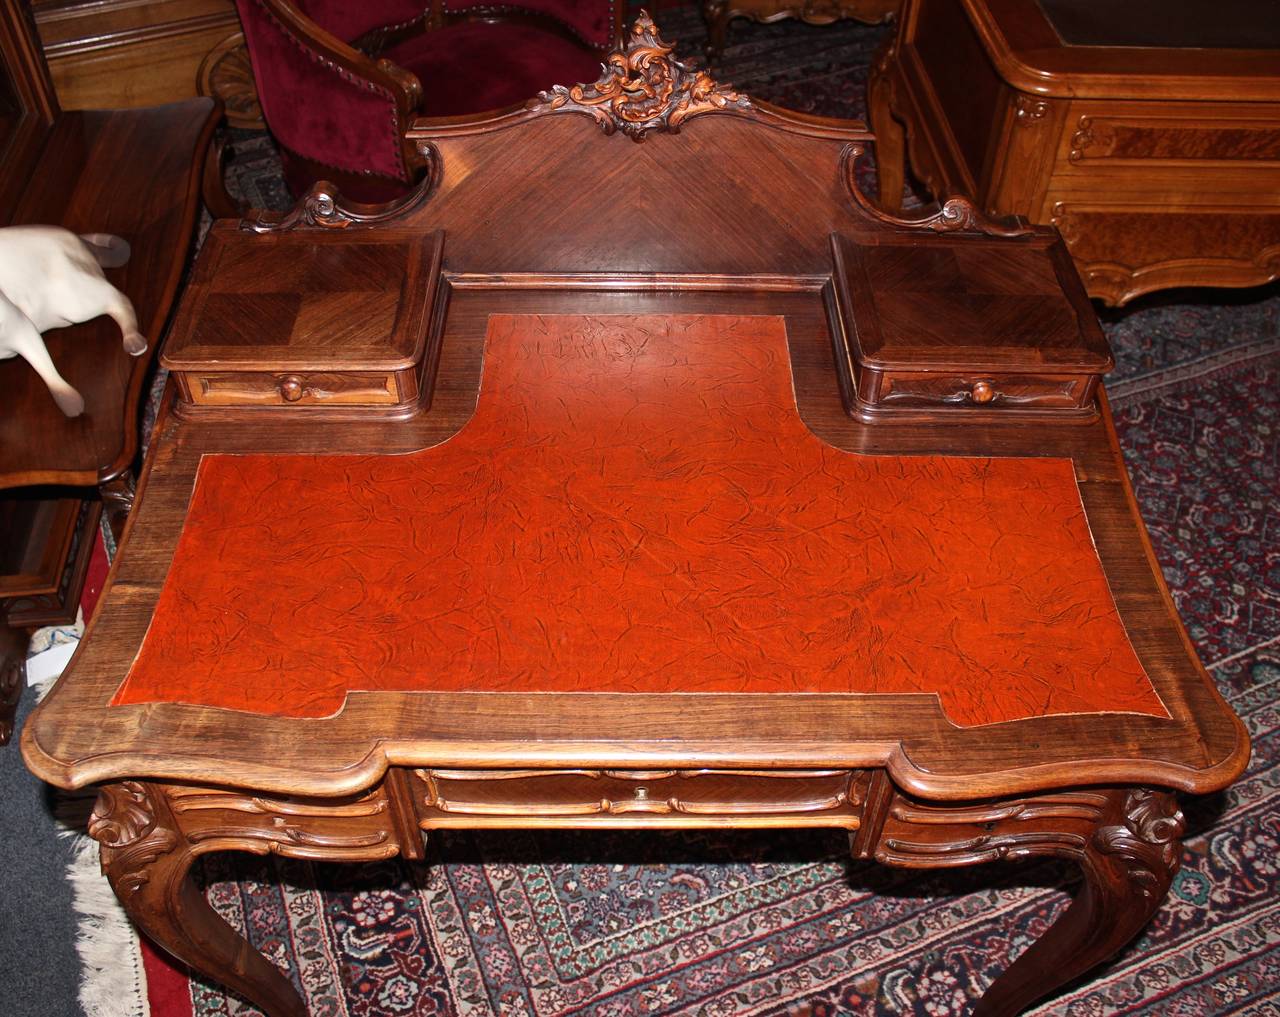 This French ladies vanity or desk was made in the Louis XV style by Mercier Freres.  It features a gorgeous, red leather top.  Storage includes multiple pull-out drawers, one of which includes a divided insert.